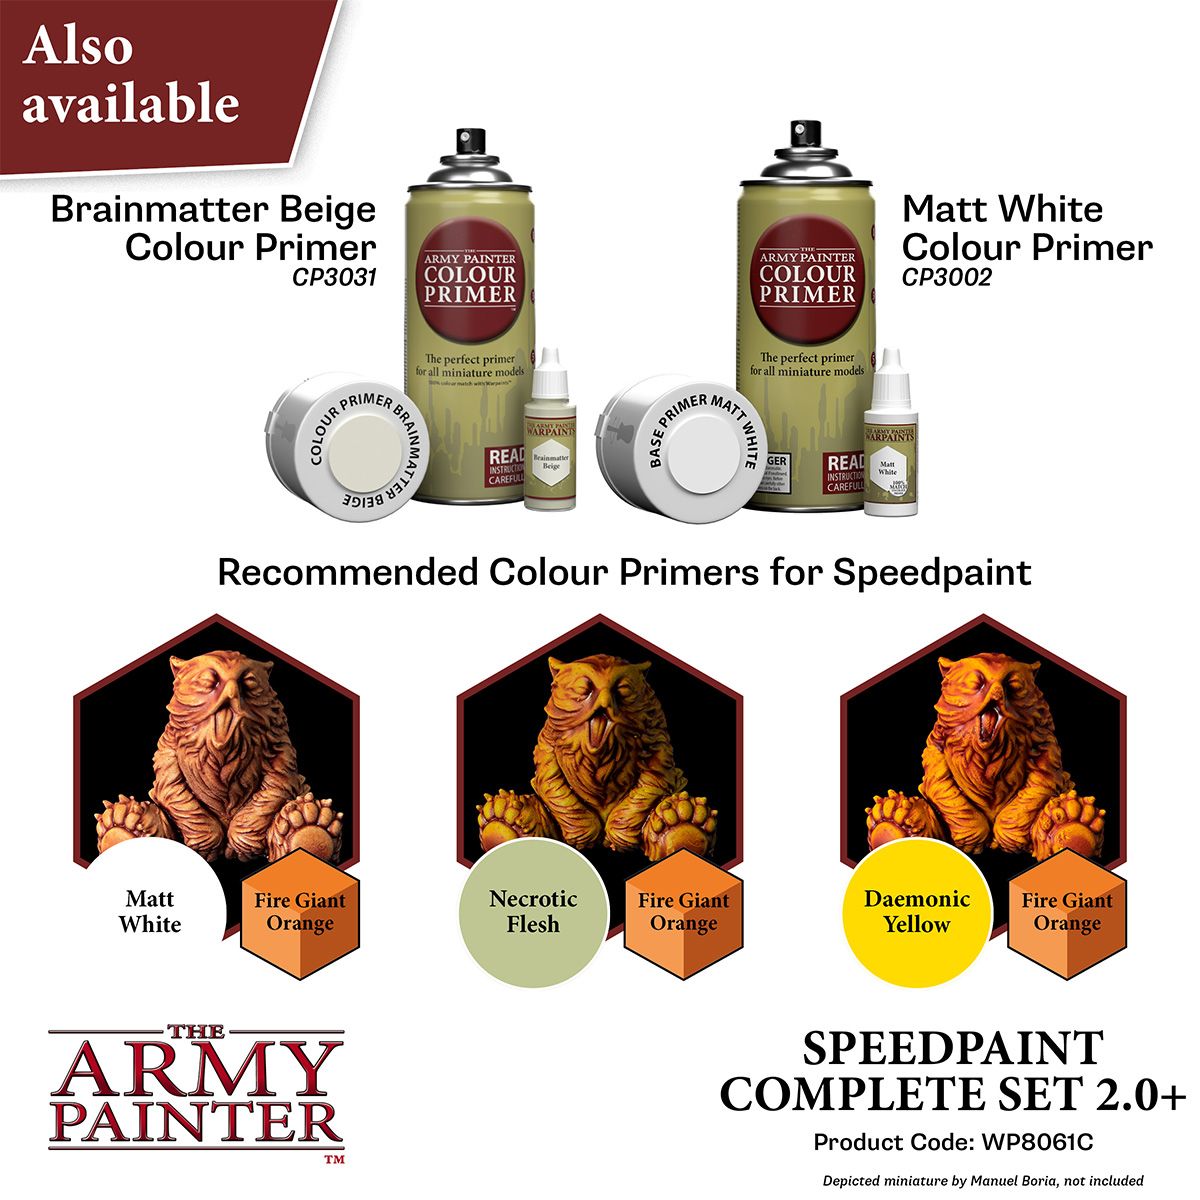 Army Painter® Speed Paint 2.0 Burnished Red - WP2083